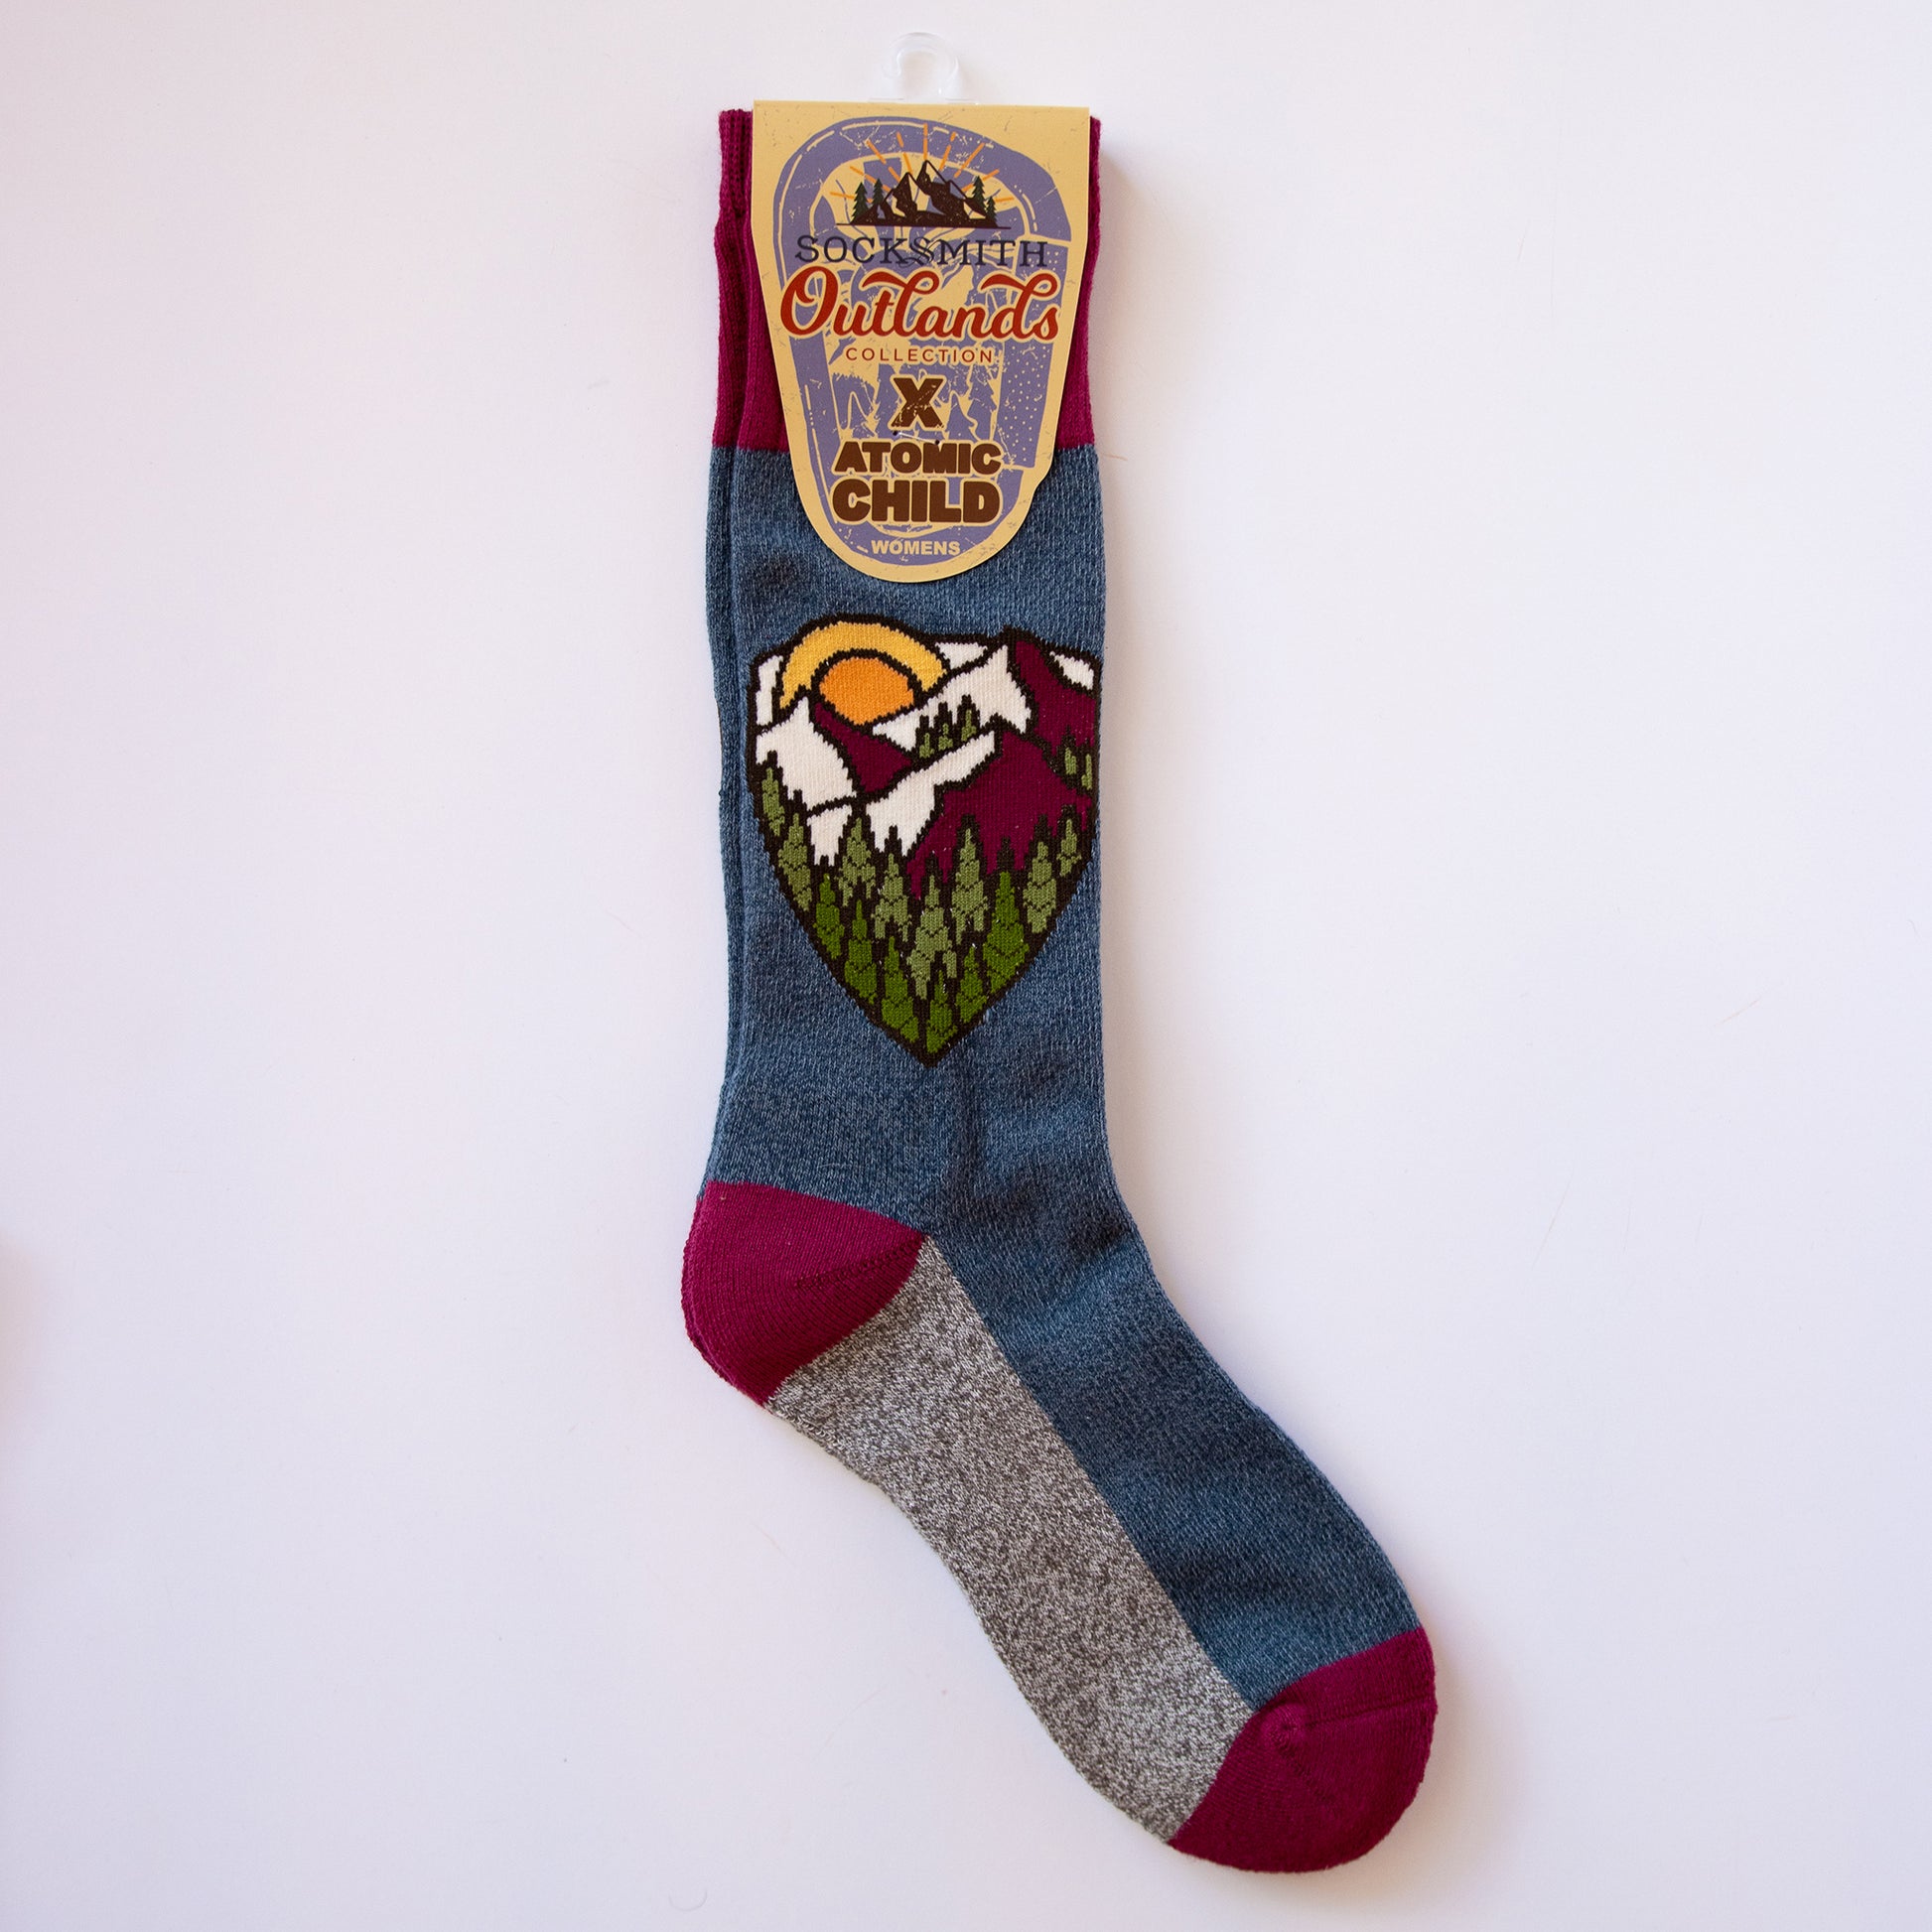 Womens mountain socks, multi-color with mountain scenes